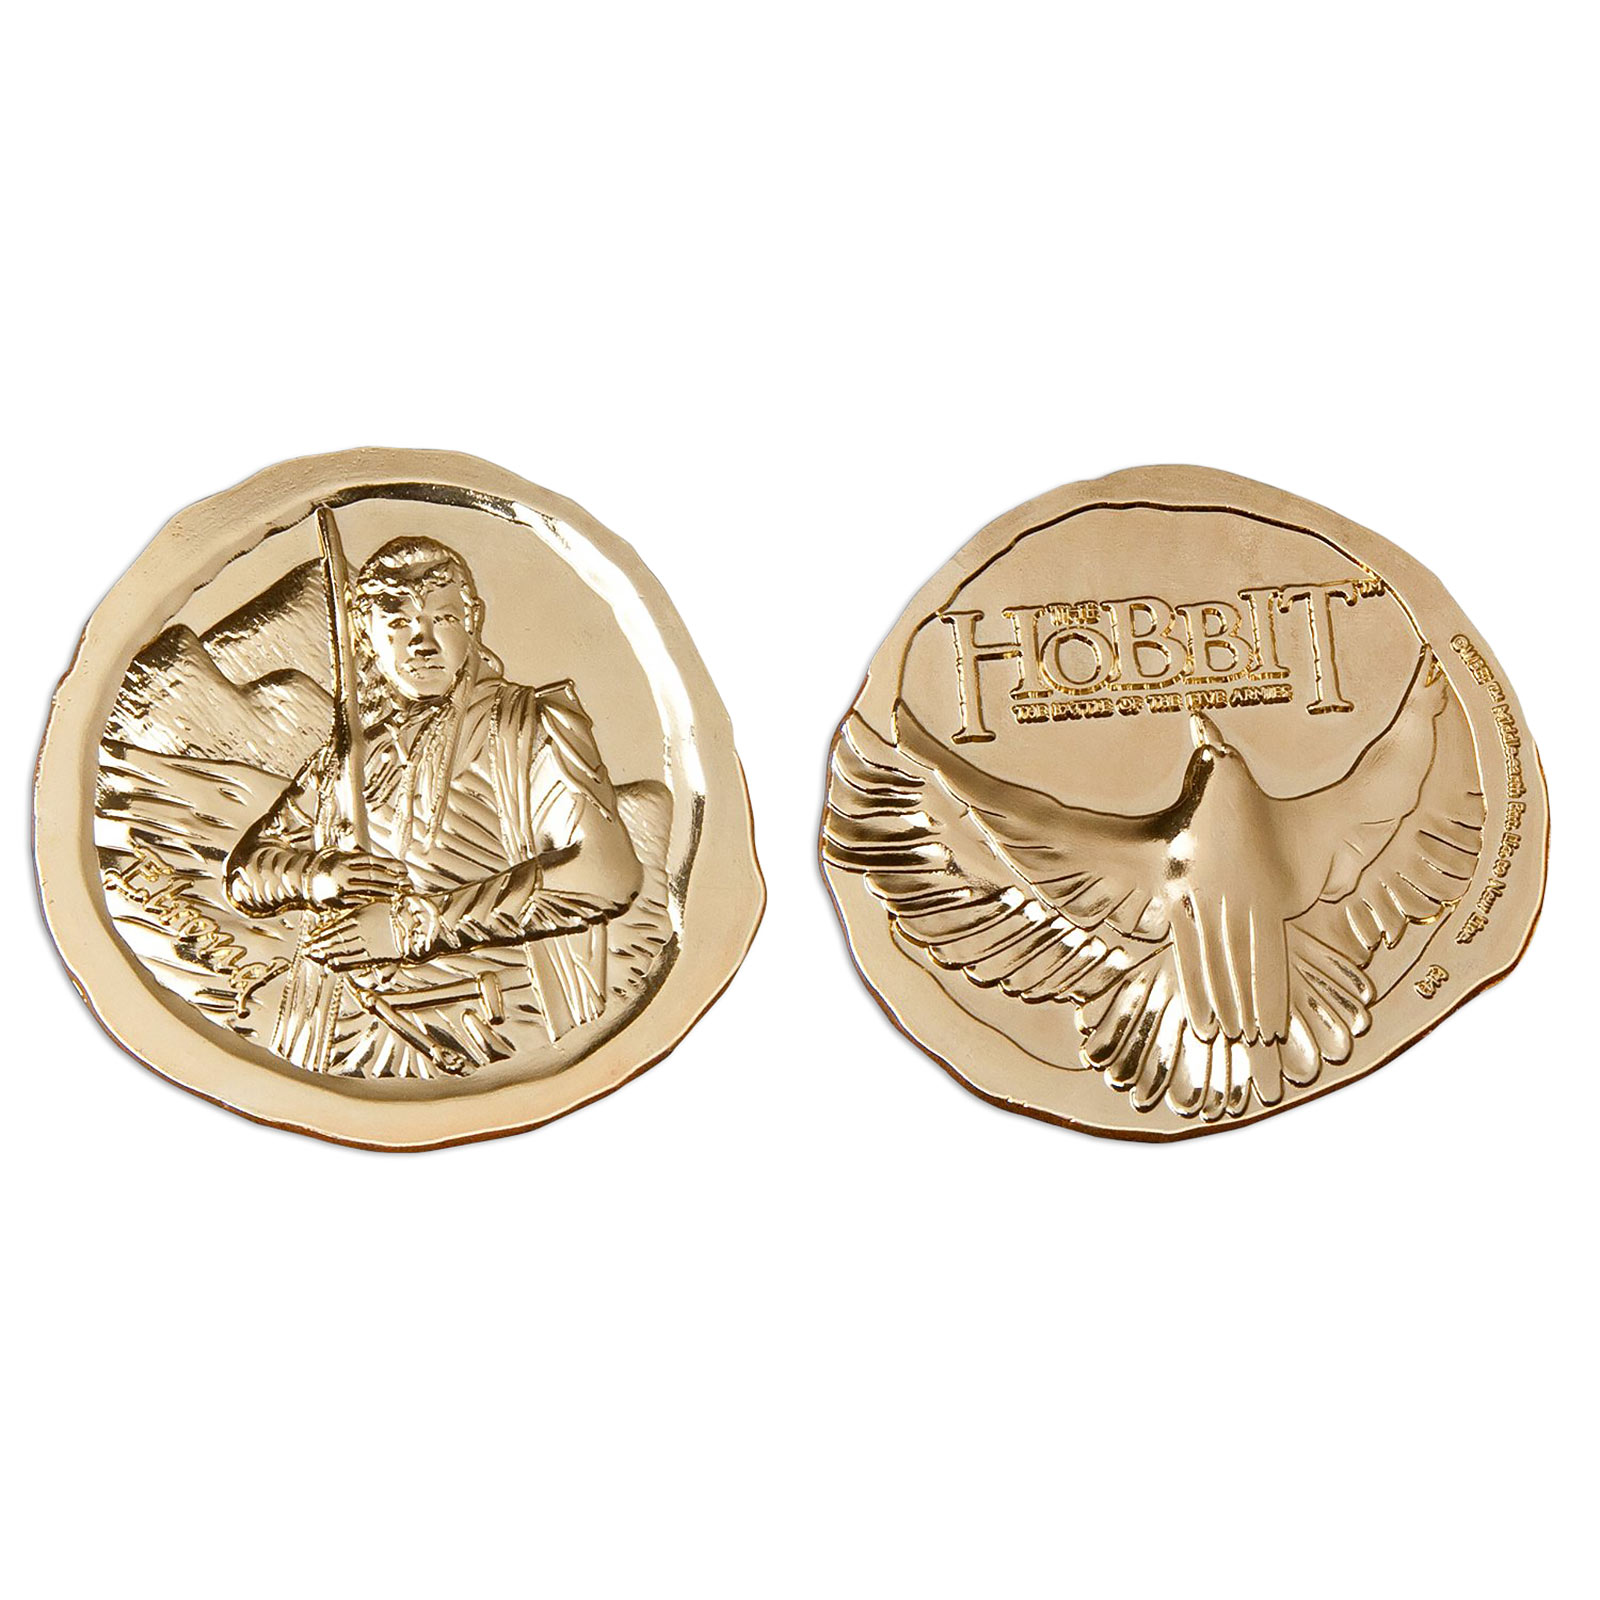 The Hobbit - Elrond Collectible Coin